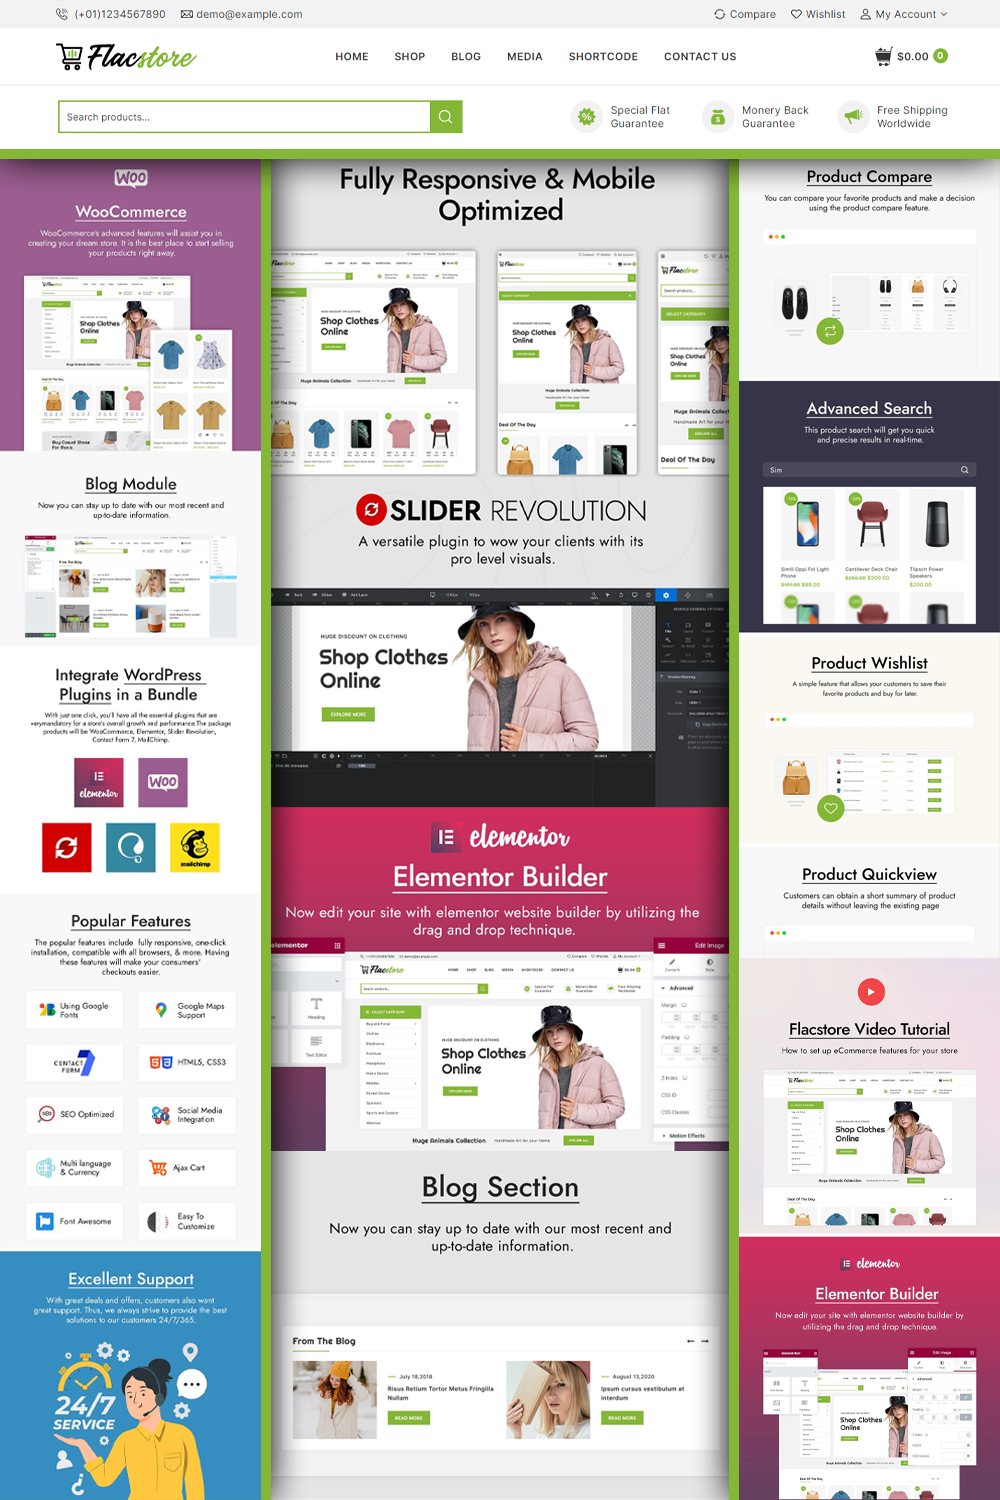 Illustrations flac store fashion and accessories woocommerce theme of pinterest.